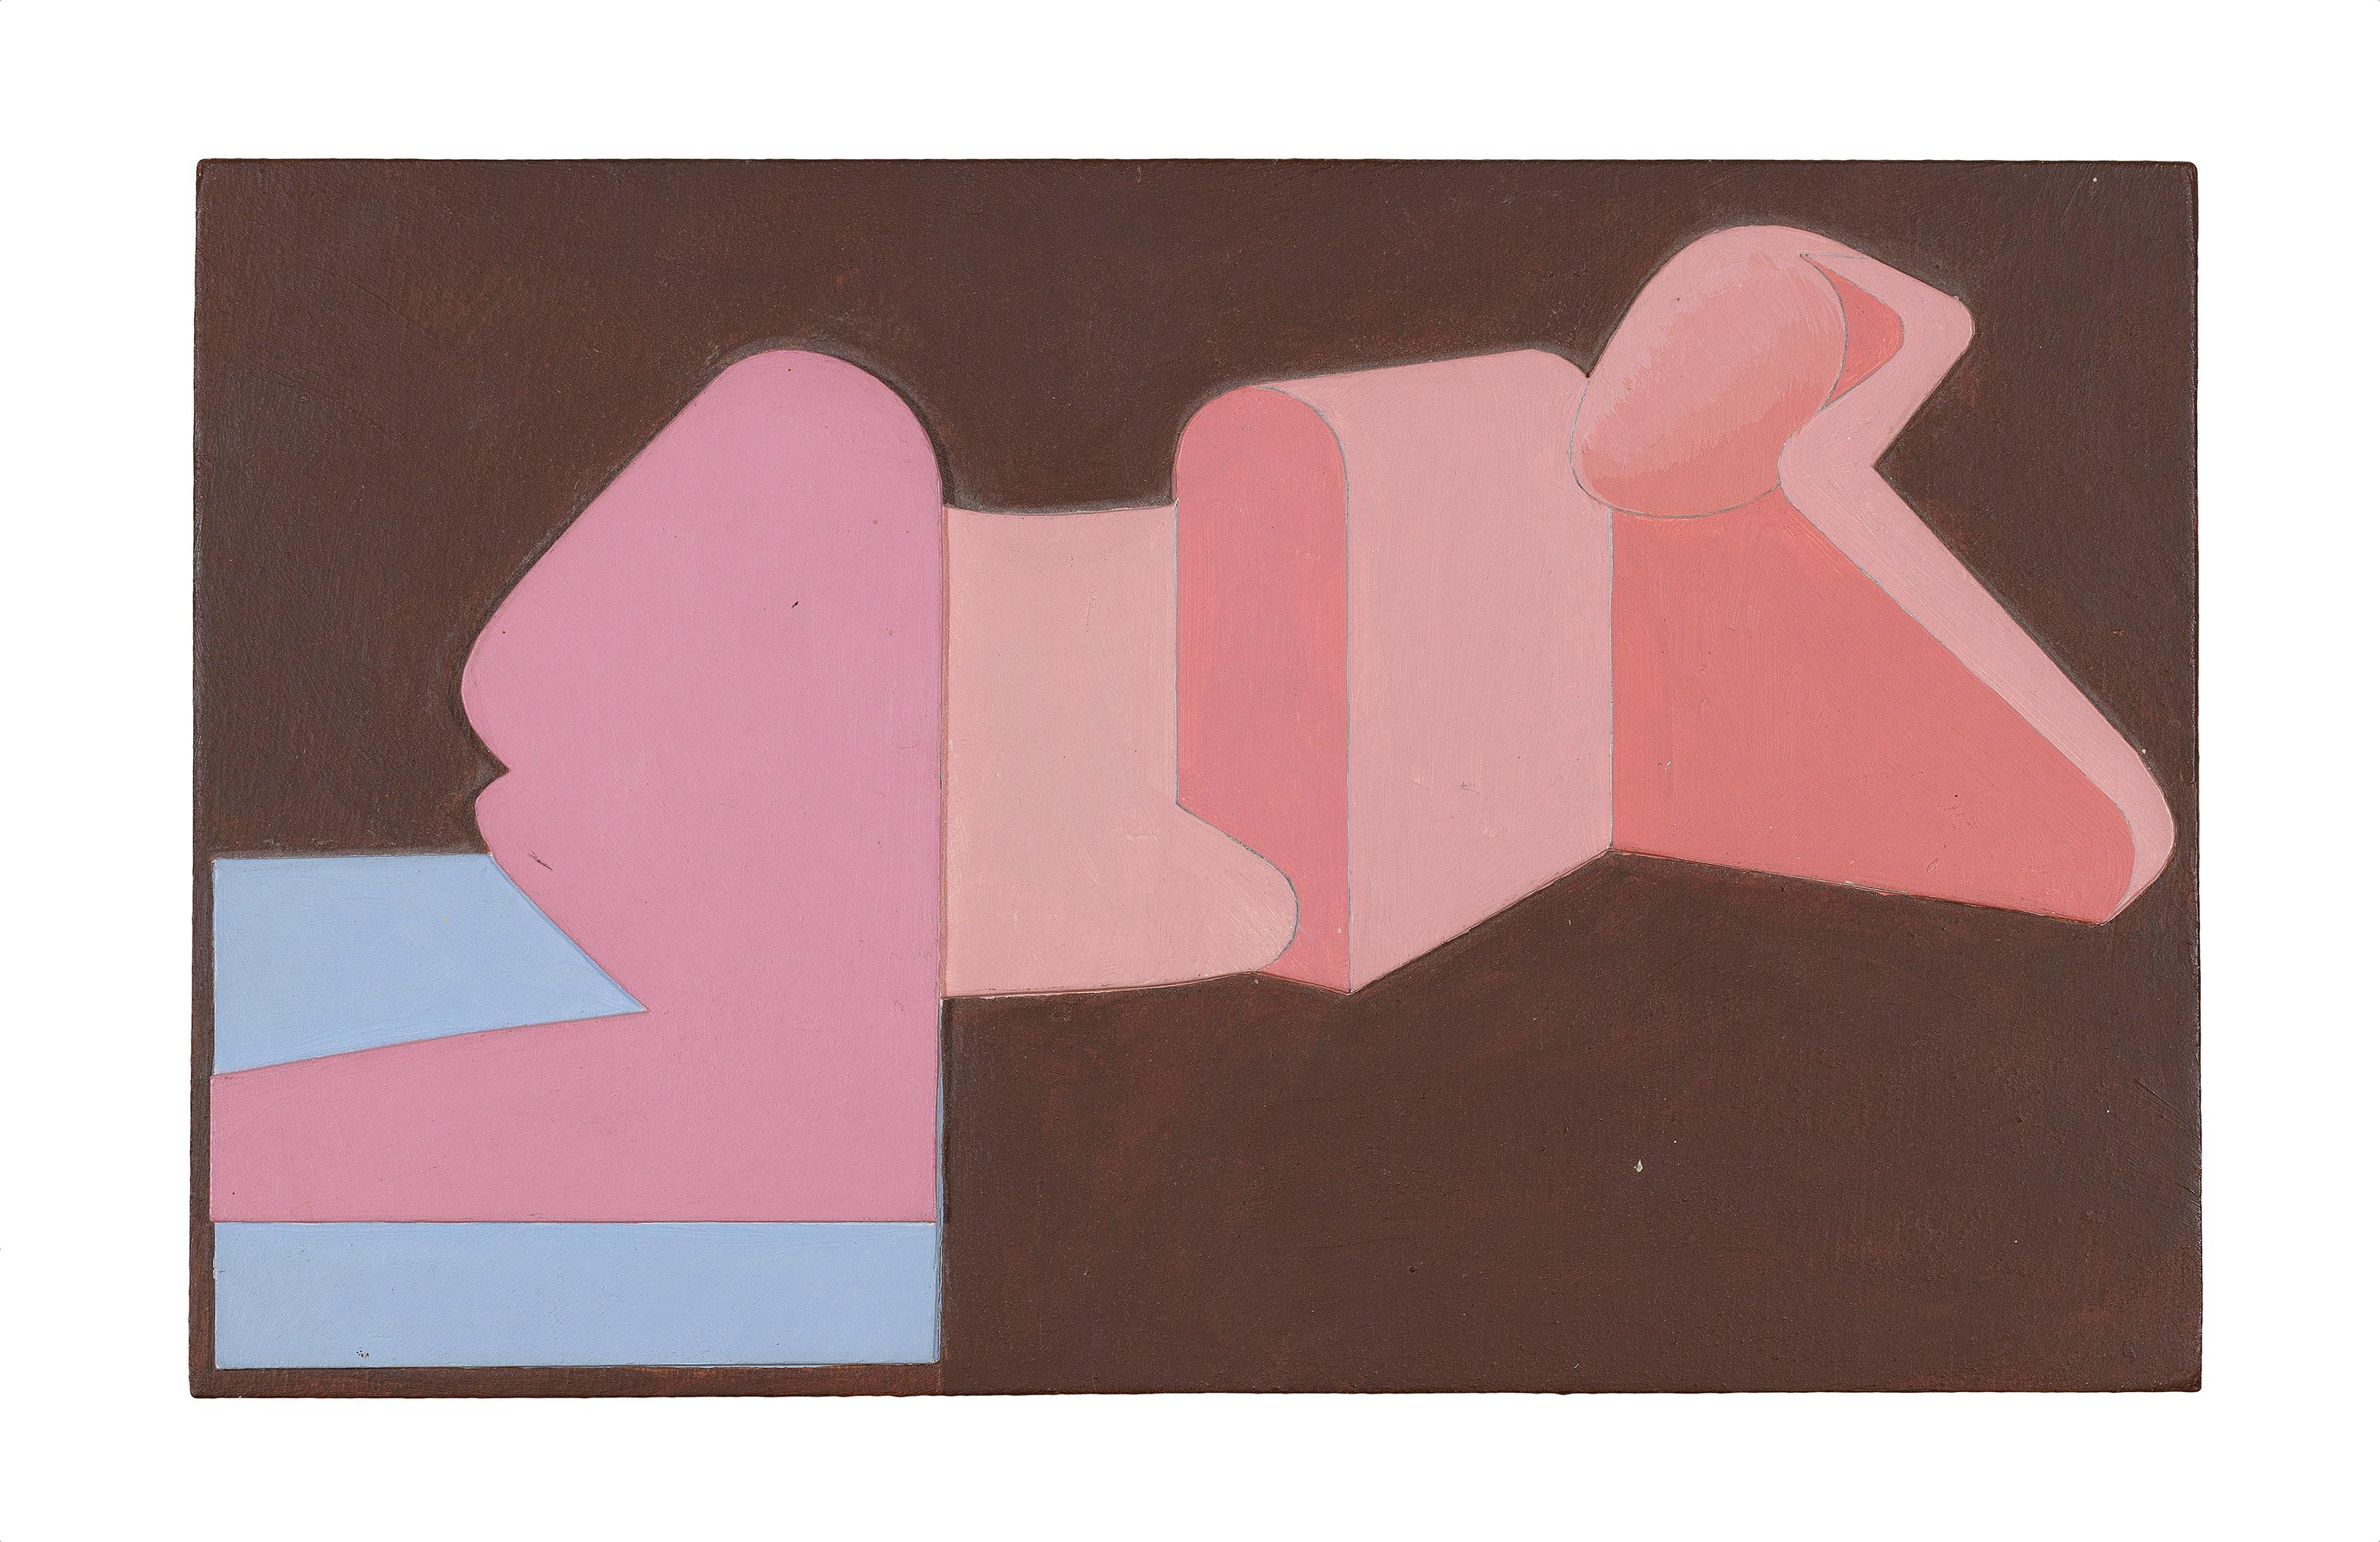 Acrylic on cardboard and plywood, 1974. 
(Knight 309). Ex. coll. Douglas Hall (the first Keeper of the Scottish National Gallery of Modern Art from 1961-86) 
(1926-2019).